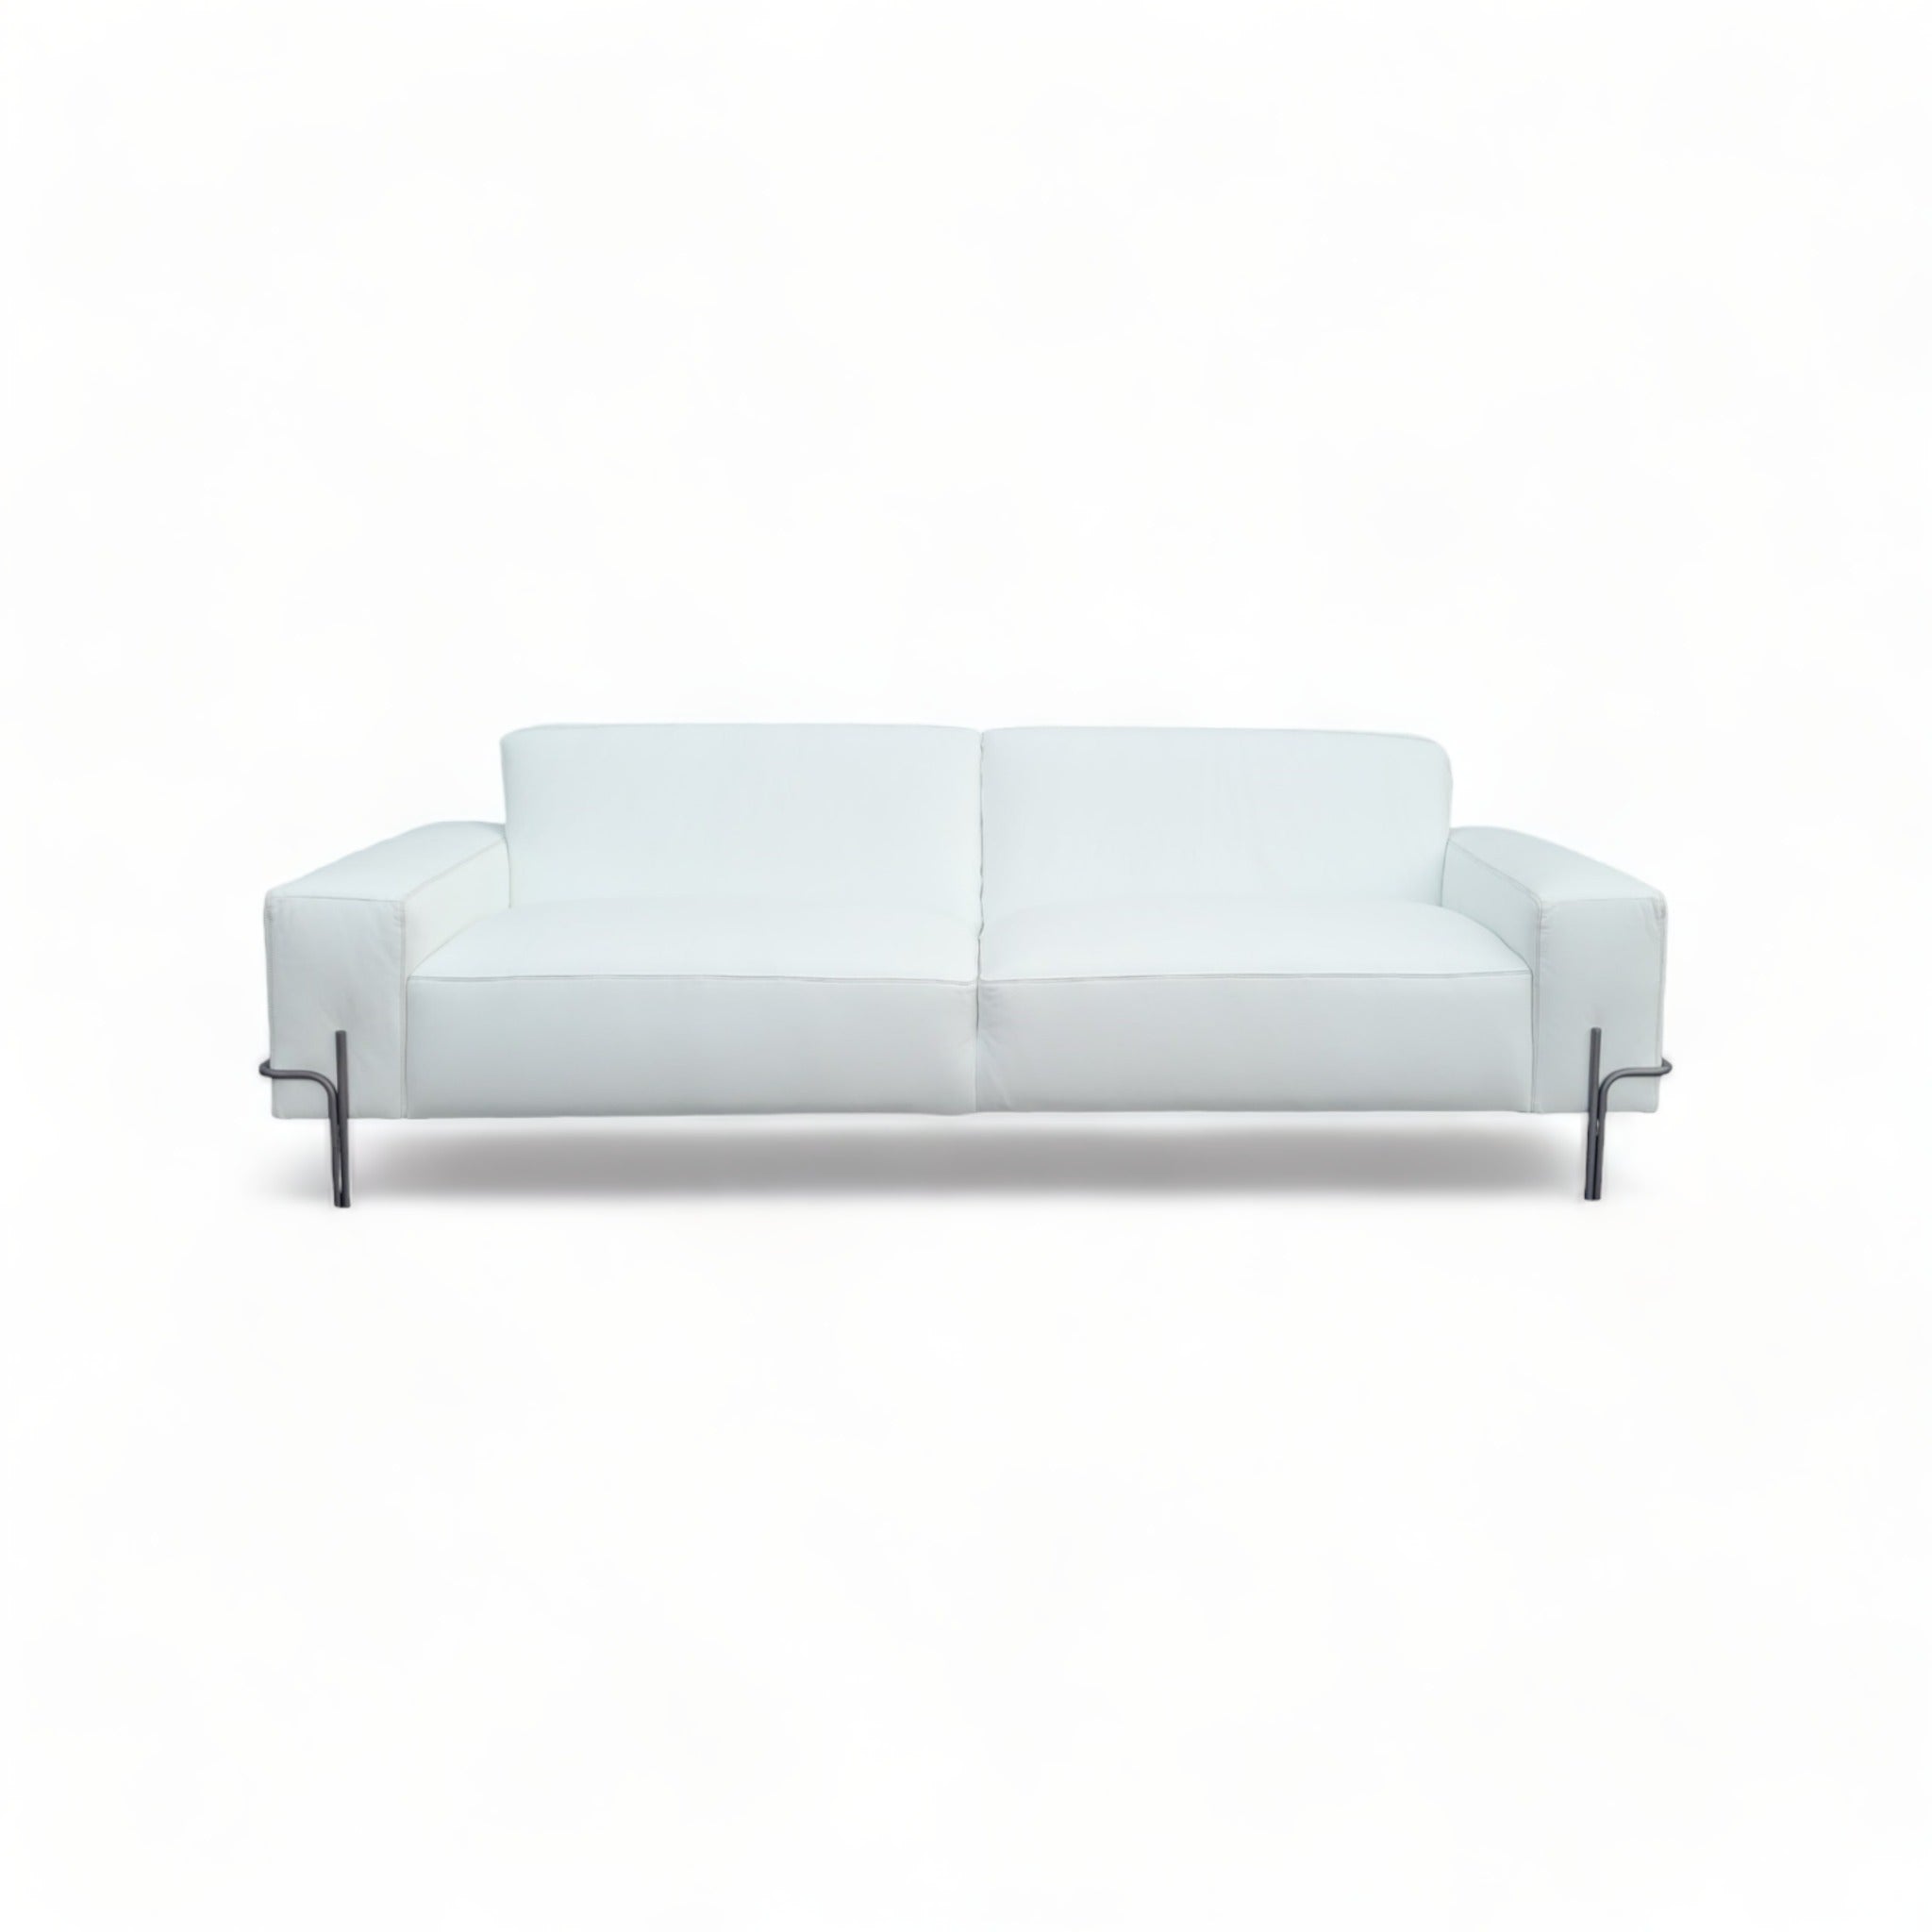 Anis White Leather Sofa (Only 1)